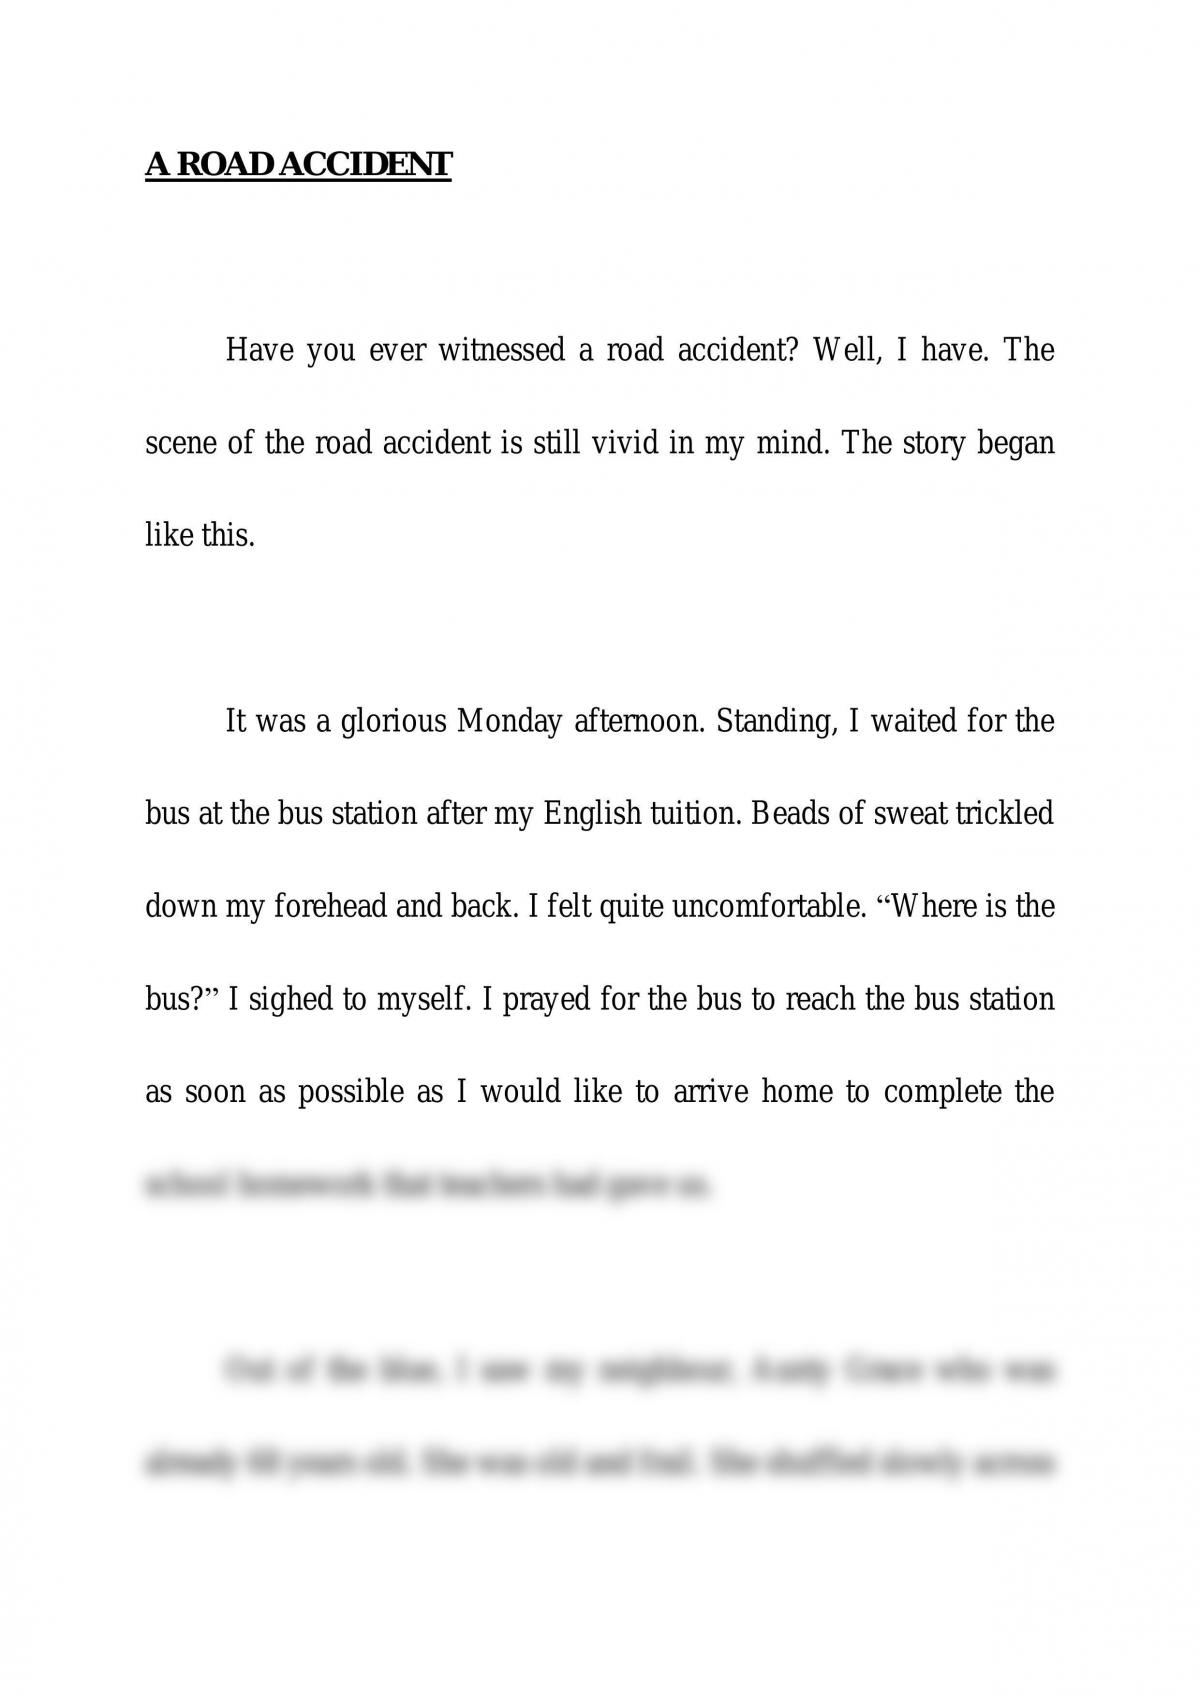 essay about home accident